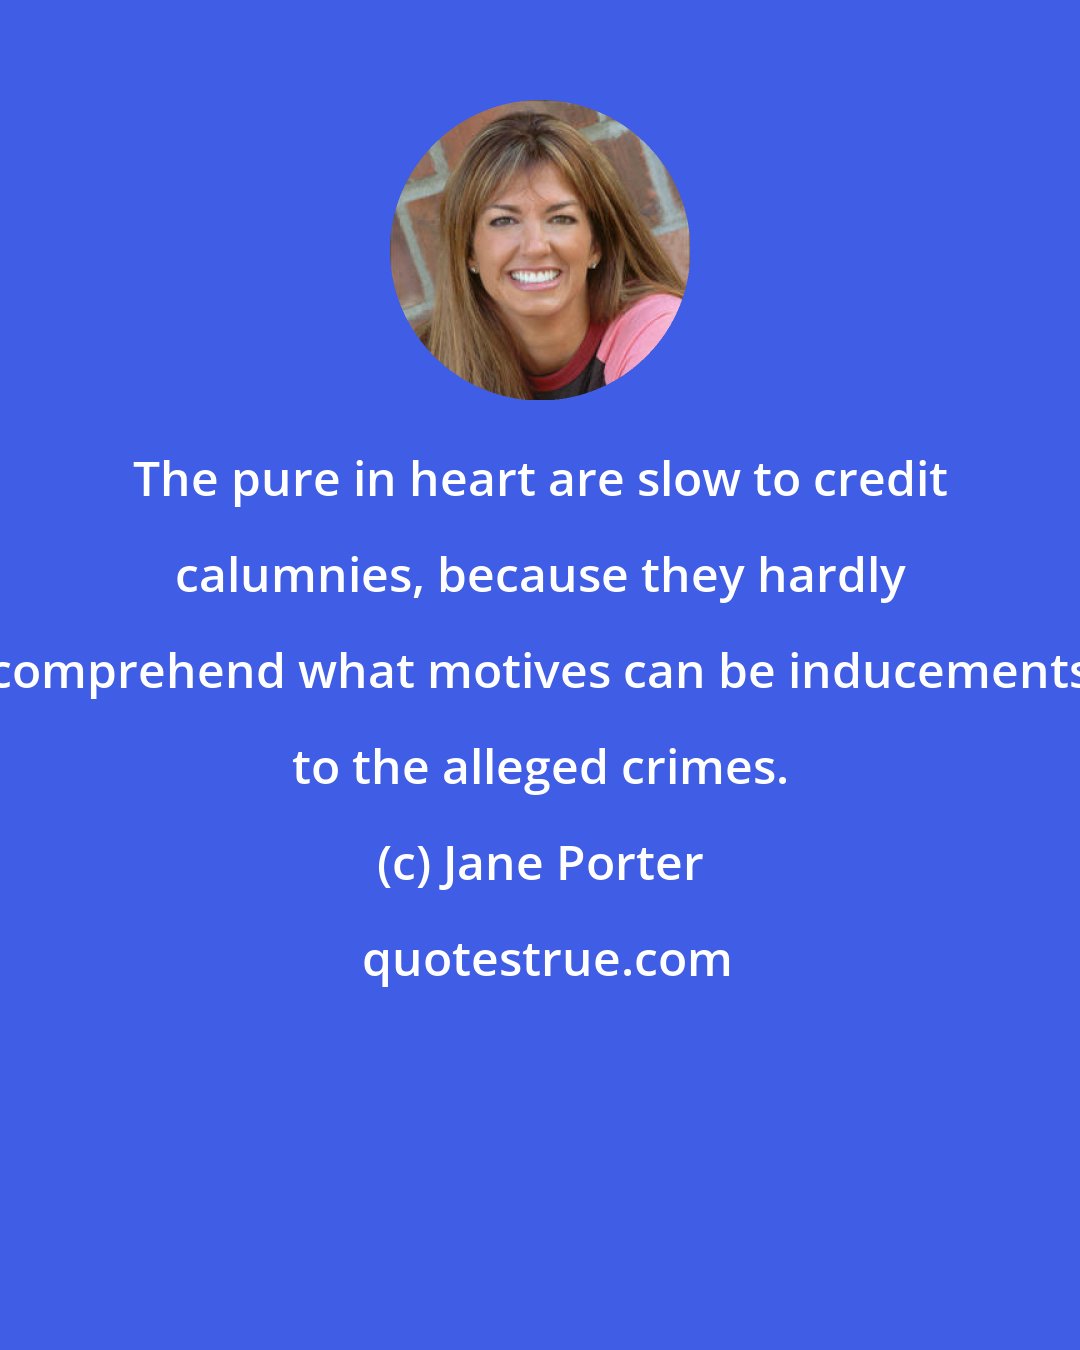 Jane Porter: The pure in heart are slow to credit calumnies, because they hardly comprehend what motives can be inducements to the alleged crimes.